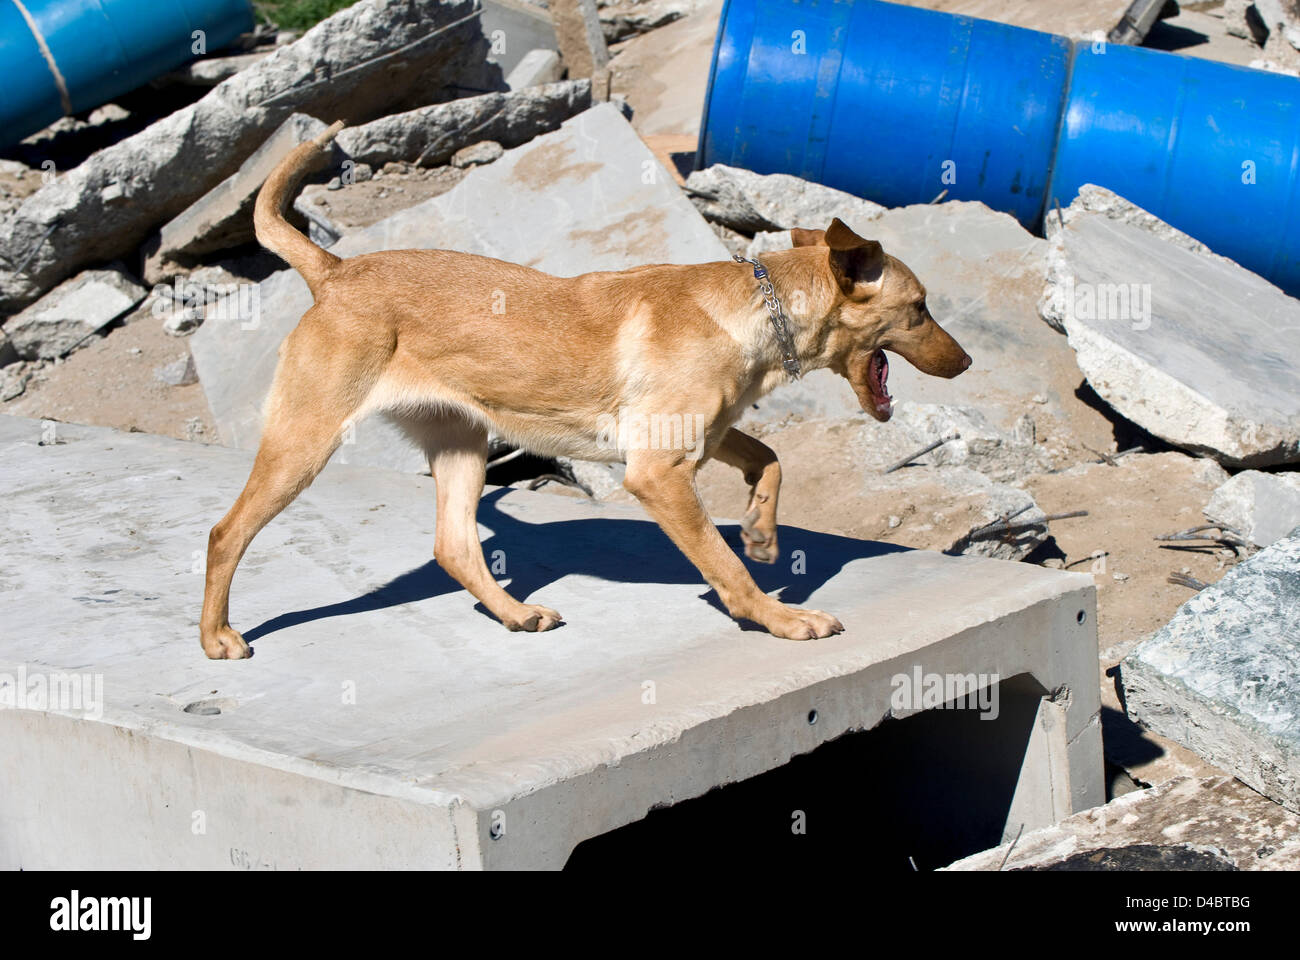 March 01, 2013 - Santa Paula, CA, US - Taylor attacks the rubble pile in search of a ''victim'' hidden in one of several barrels scattered among the debris during training at the Search Dog Foundation Training Center.  Taylor's reward for finding the person will be a treat and a game of pull toy tug-of-war with his trainer.  The SDF is a non-profit, non-governmental organization which strengthens disaster preparedness in the US by partnering rescued dogs with firefighter handlers to find people buried alive in the wreckage of disasters.  The teams are provided at no cost to fire departments an Stock Photo